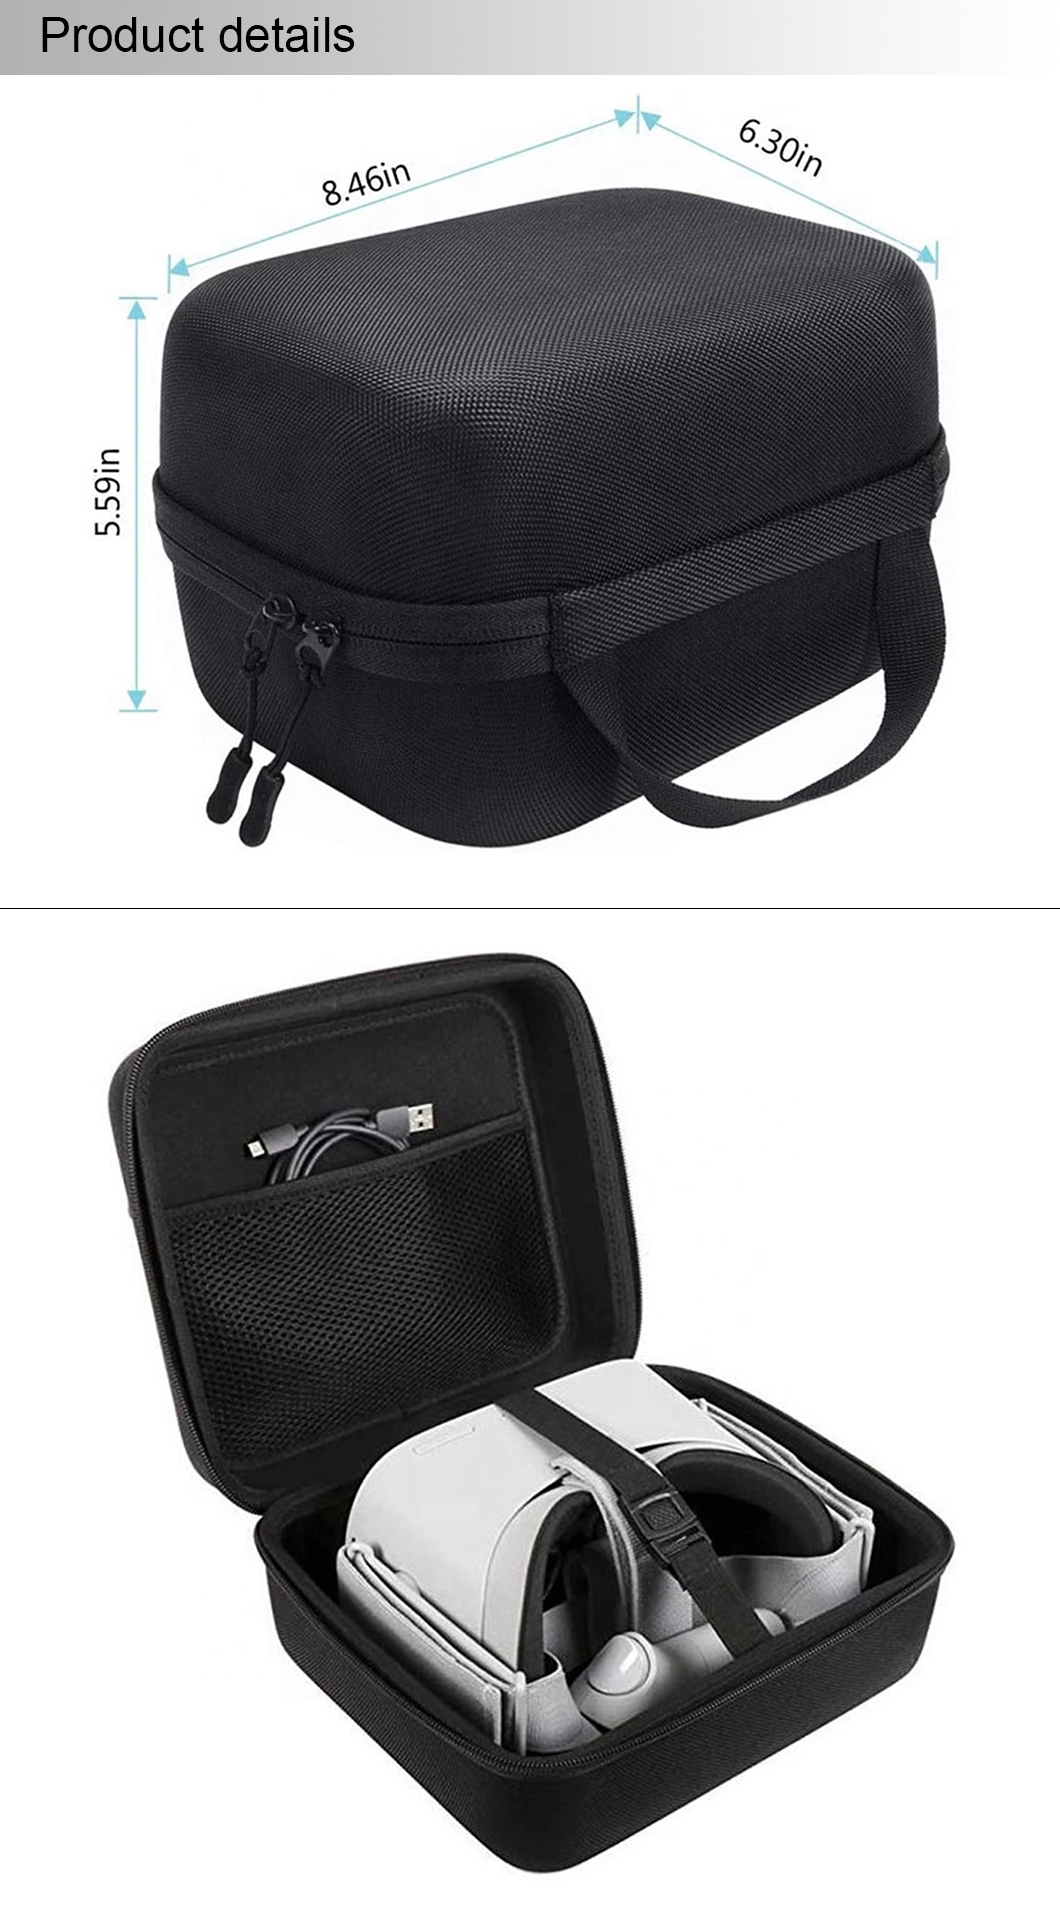 Hard EVA Case Protective Carry Bag Storage Box for VR Headset & Accessories(图1)